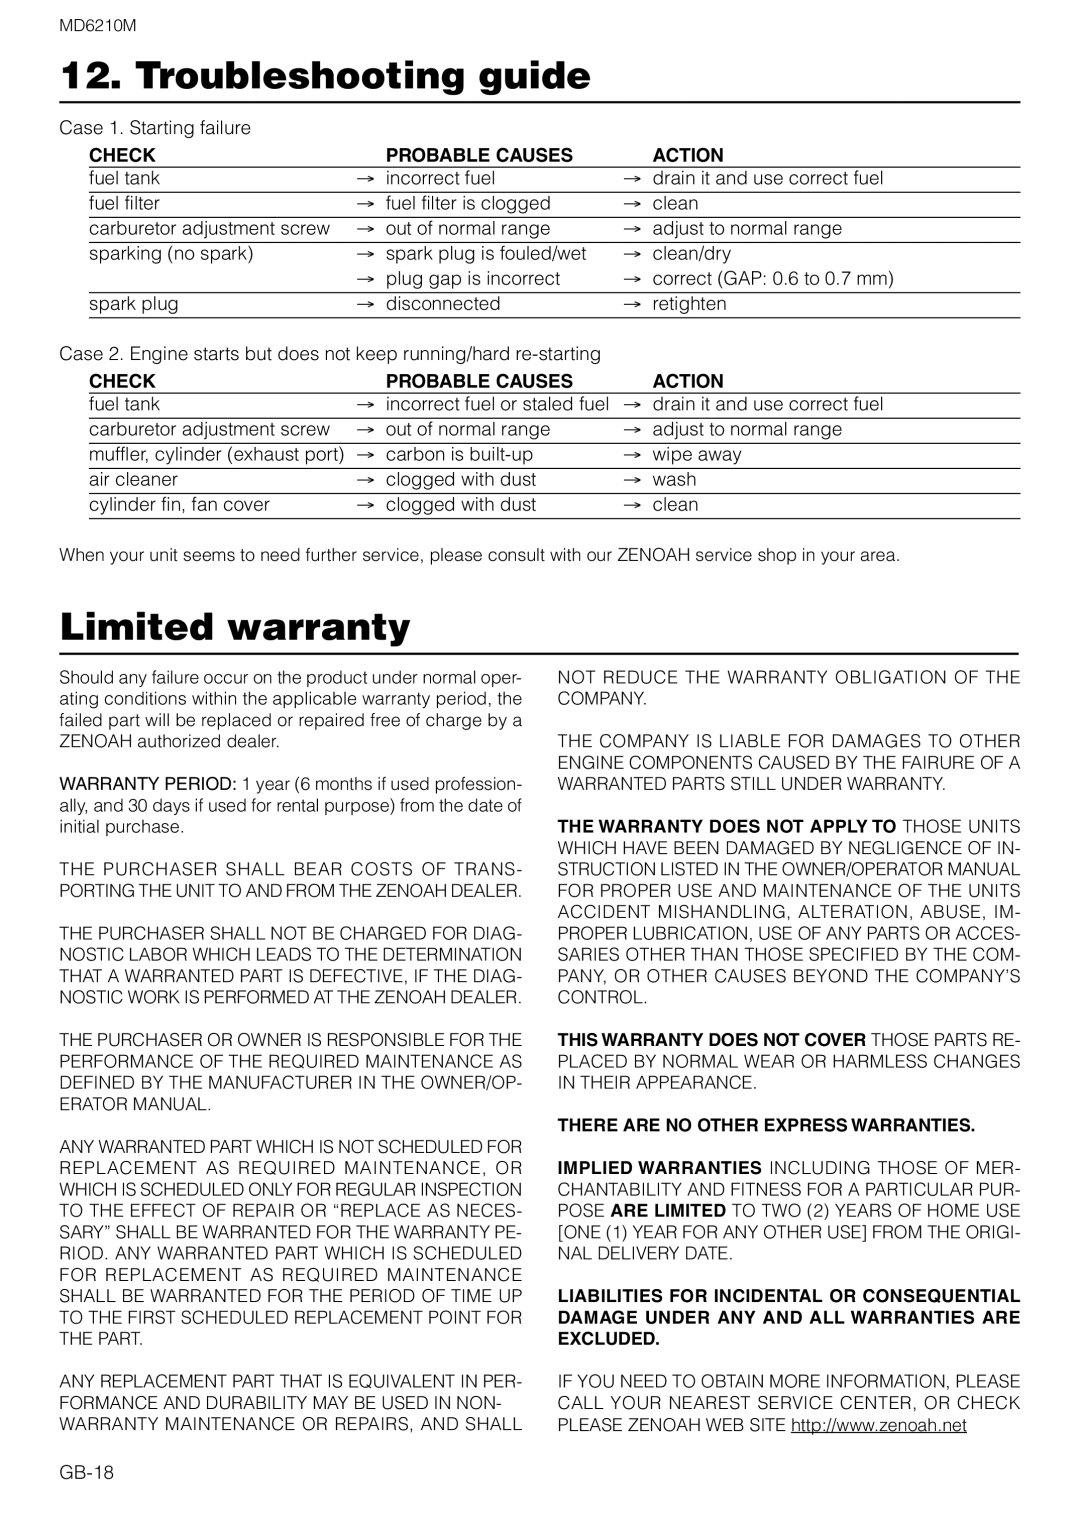 Zenoah MD6210M owner manual Troubleshooting guide, Limited warranty, Check, Probable Causes, Action 